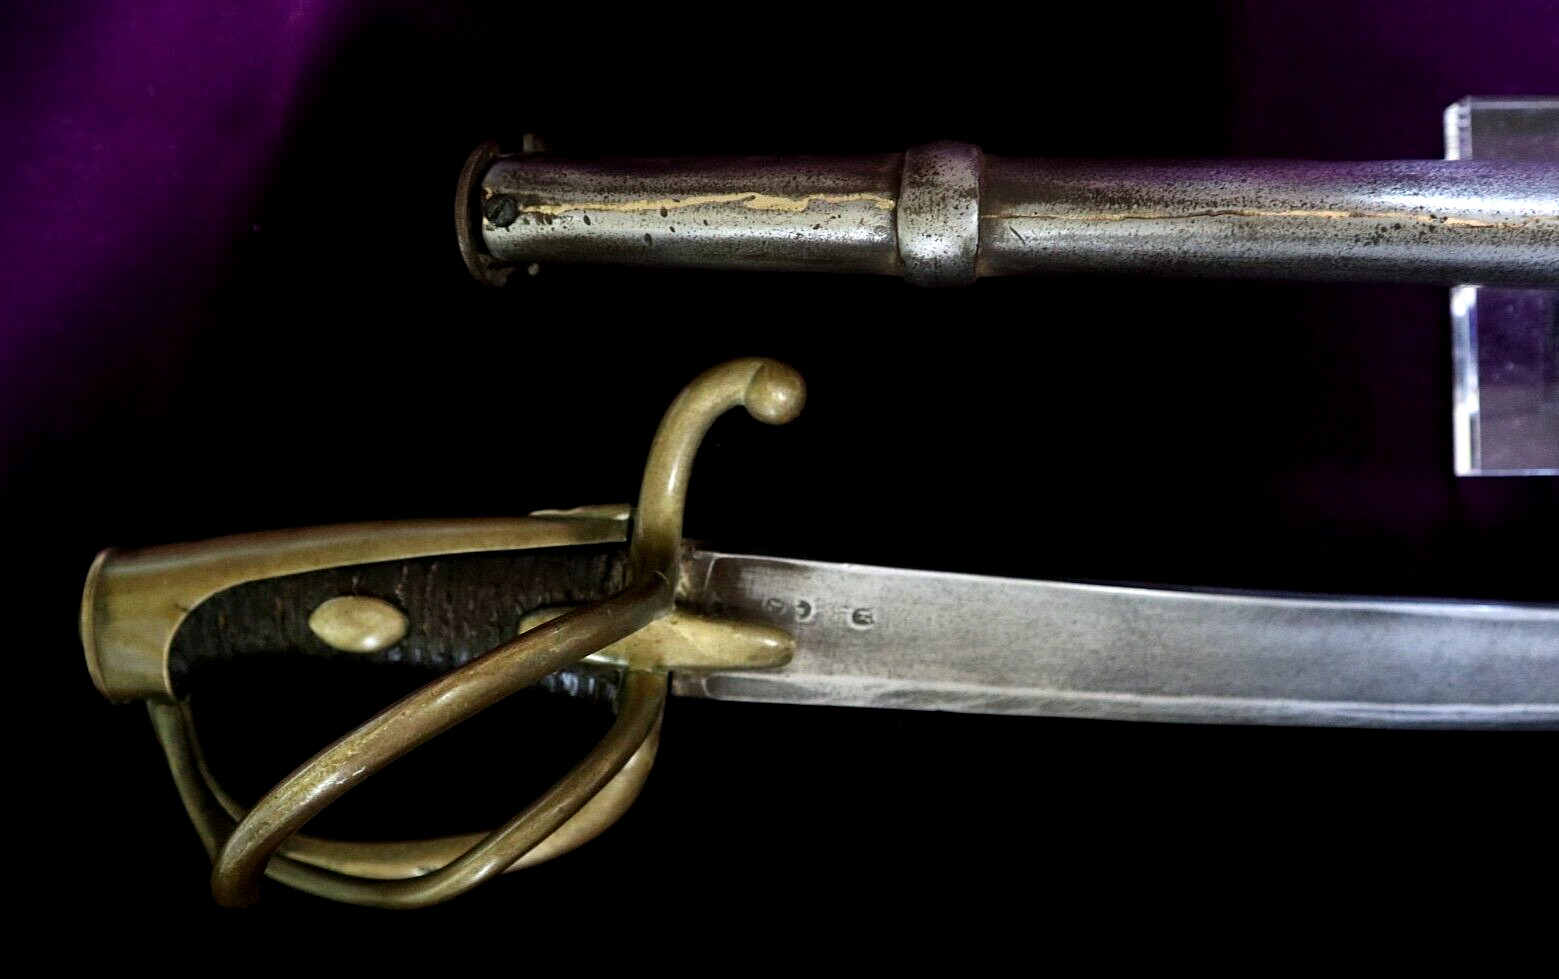 NAPOLEONIC FRENCH AN XI LIGHT CAVALRY SWORD DATED 1813 RICHARD BEZDEK COLLECTION